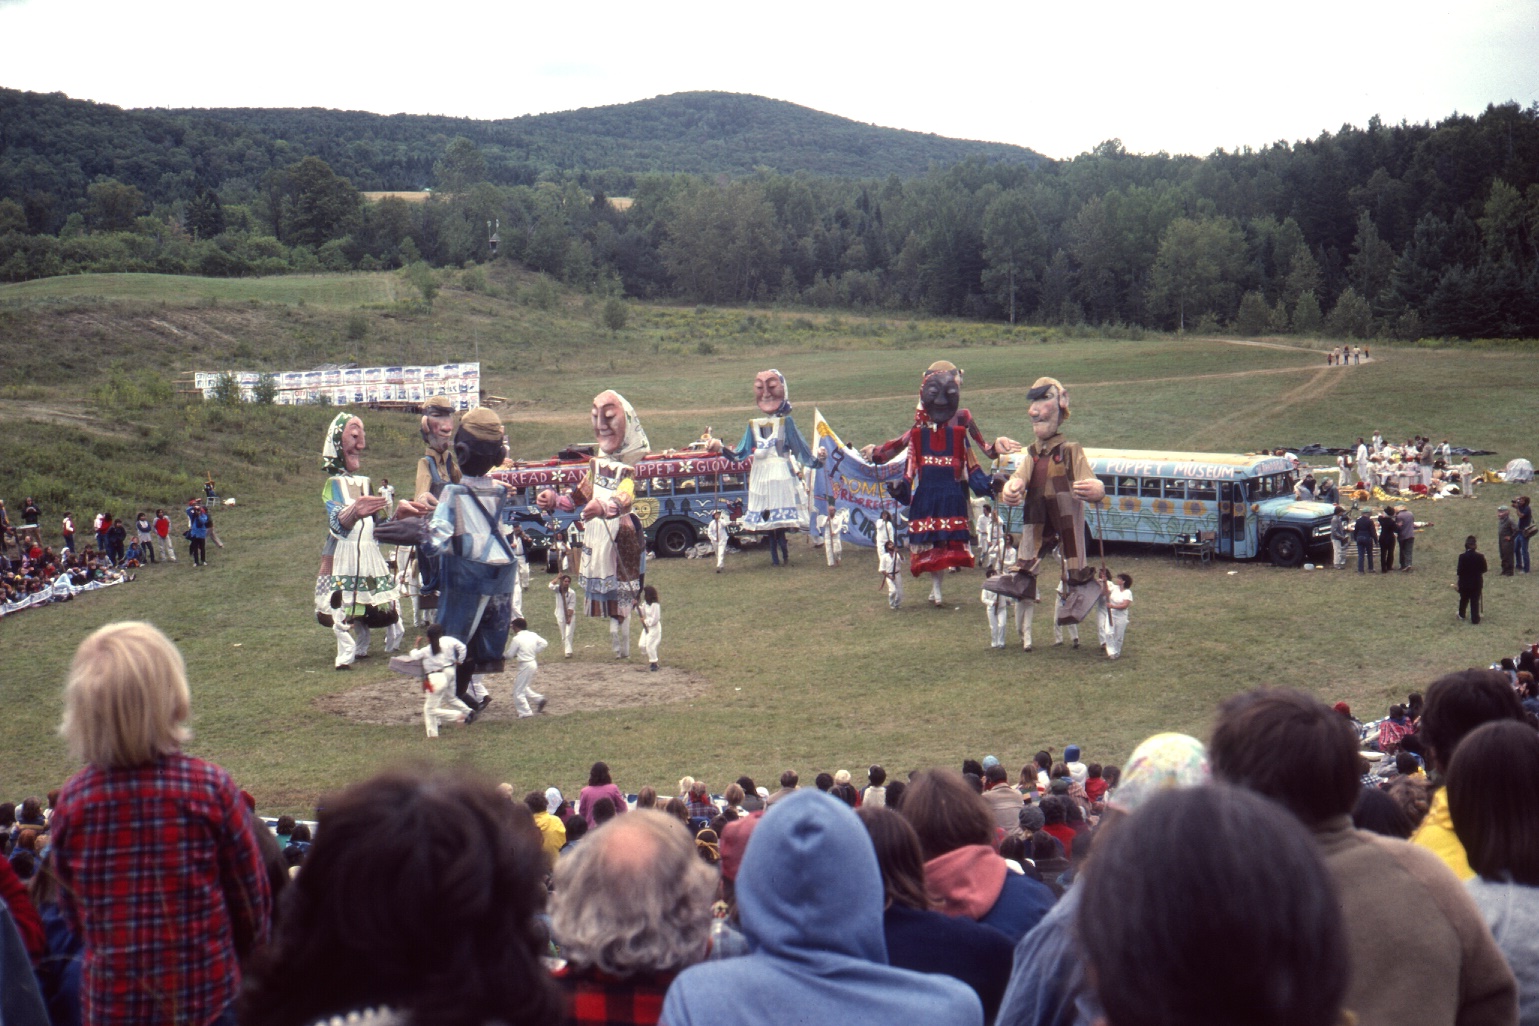 Performance of the Bread and Puppet Theater.